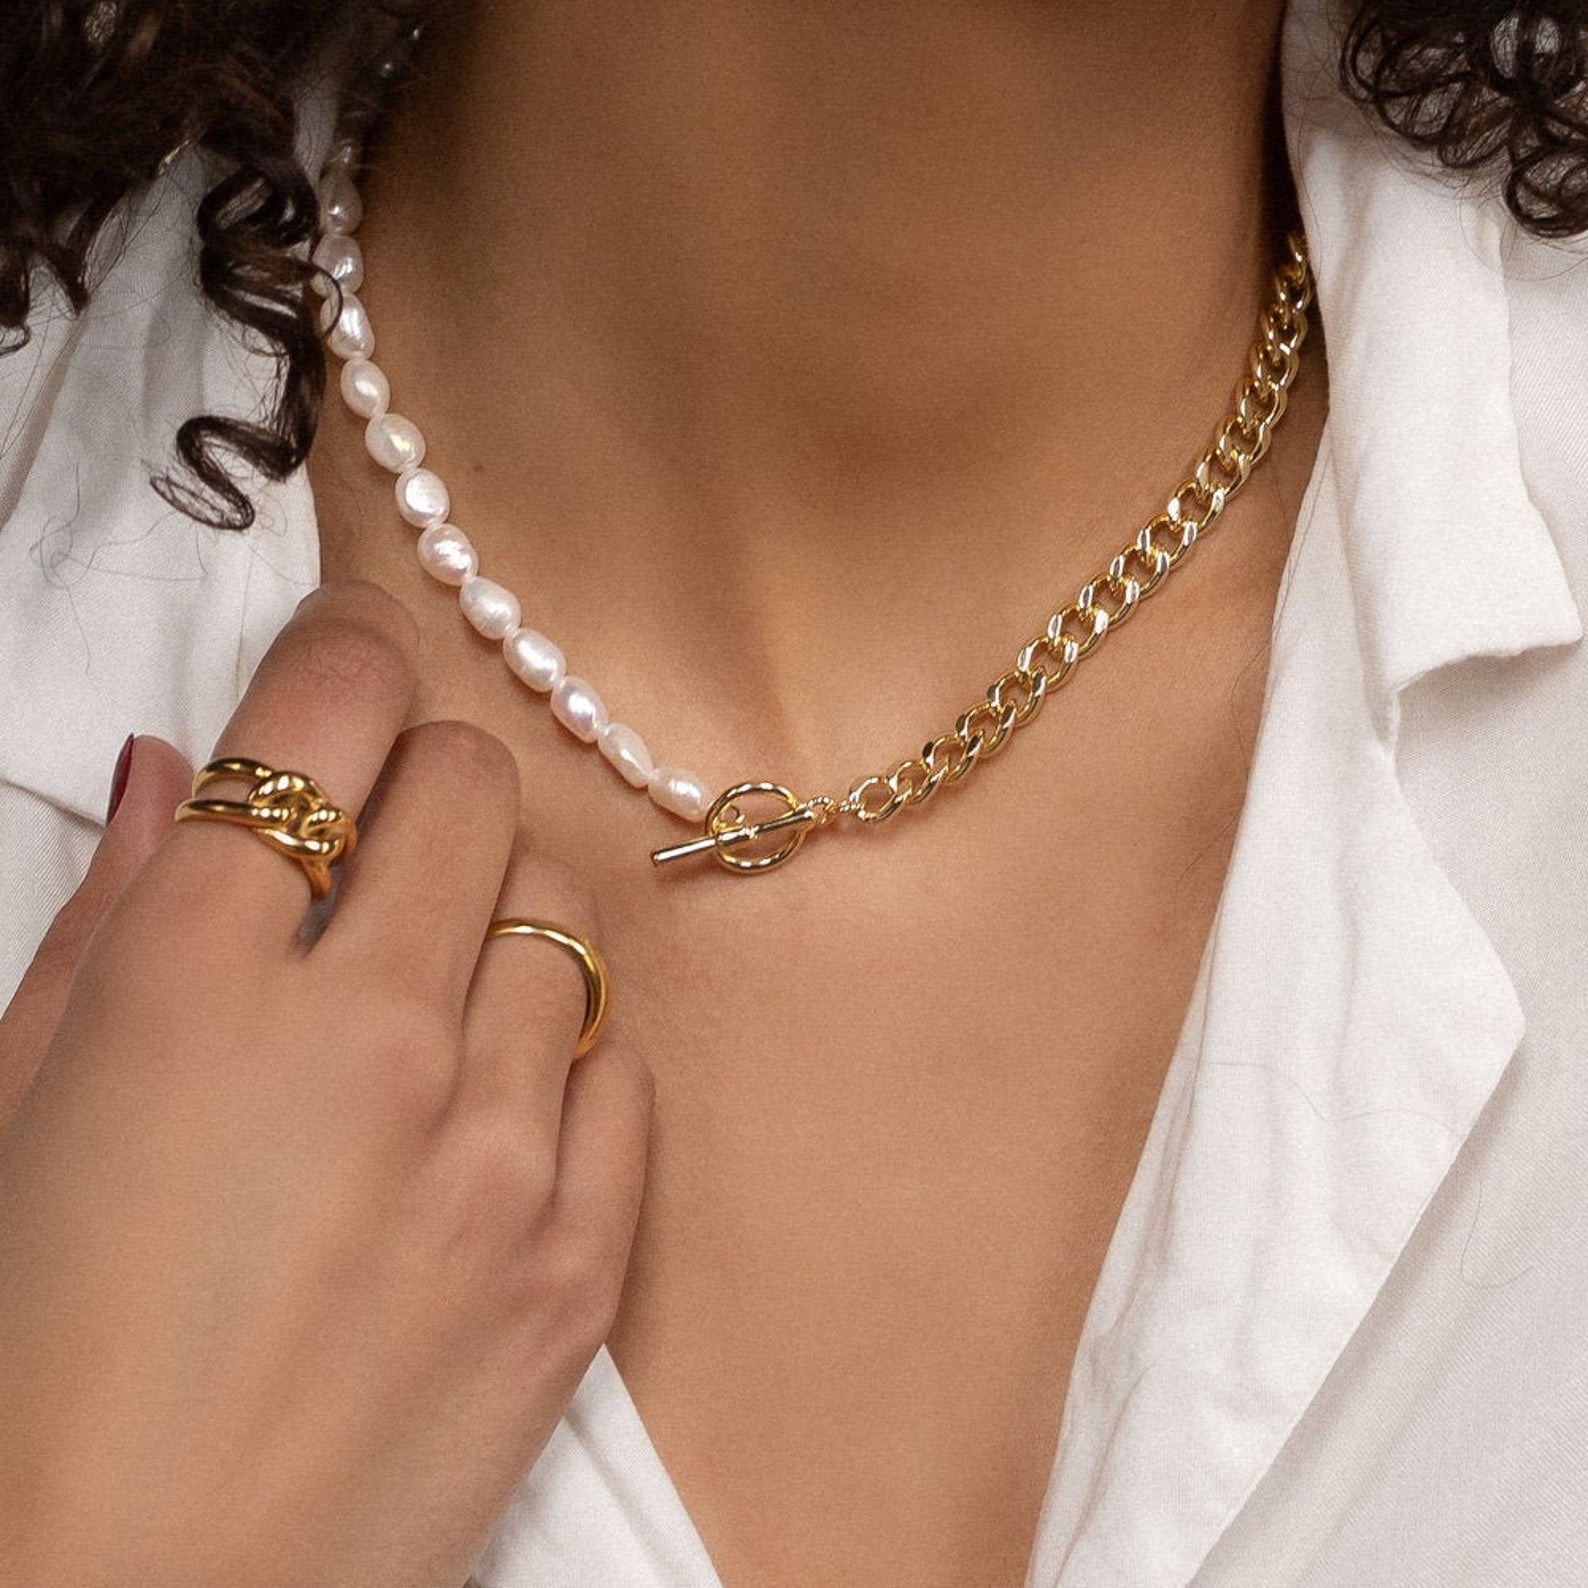 GOLD Layered Chain Ring Necklace Set - Necklaces